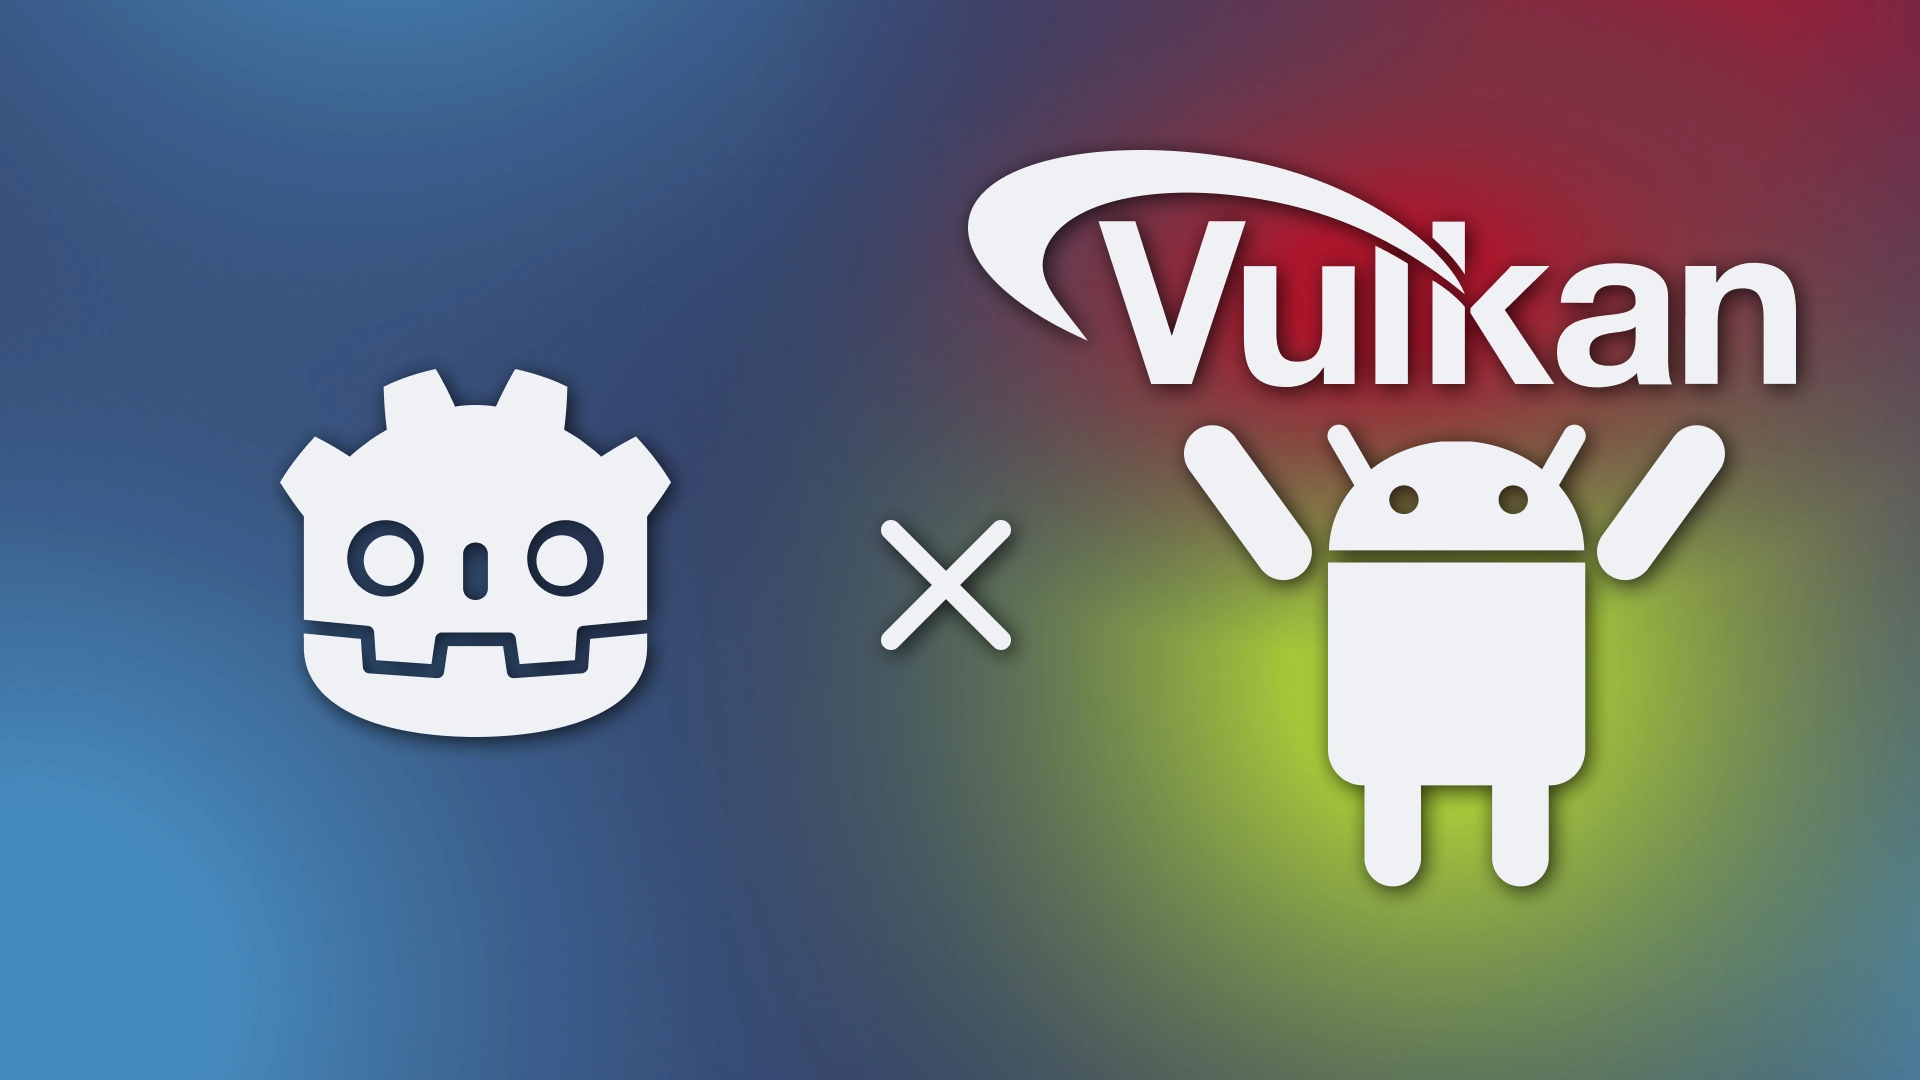 Our collaboration with Google and The Forge has achieved its original goal of improving performance in the Vulkan backend and enhancing our Vulkan API